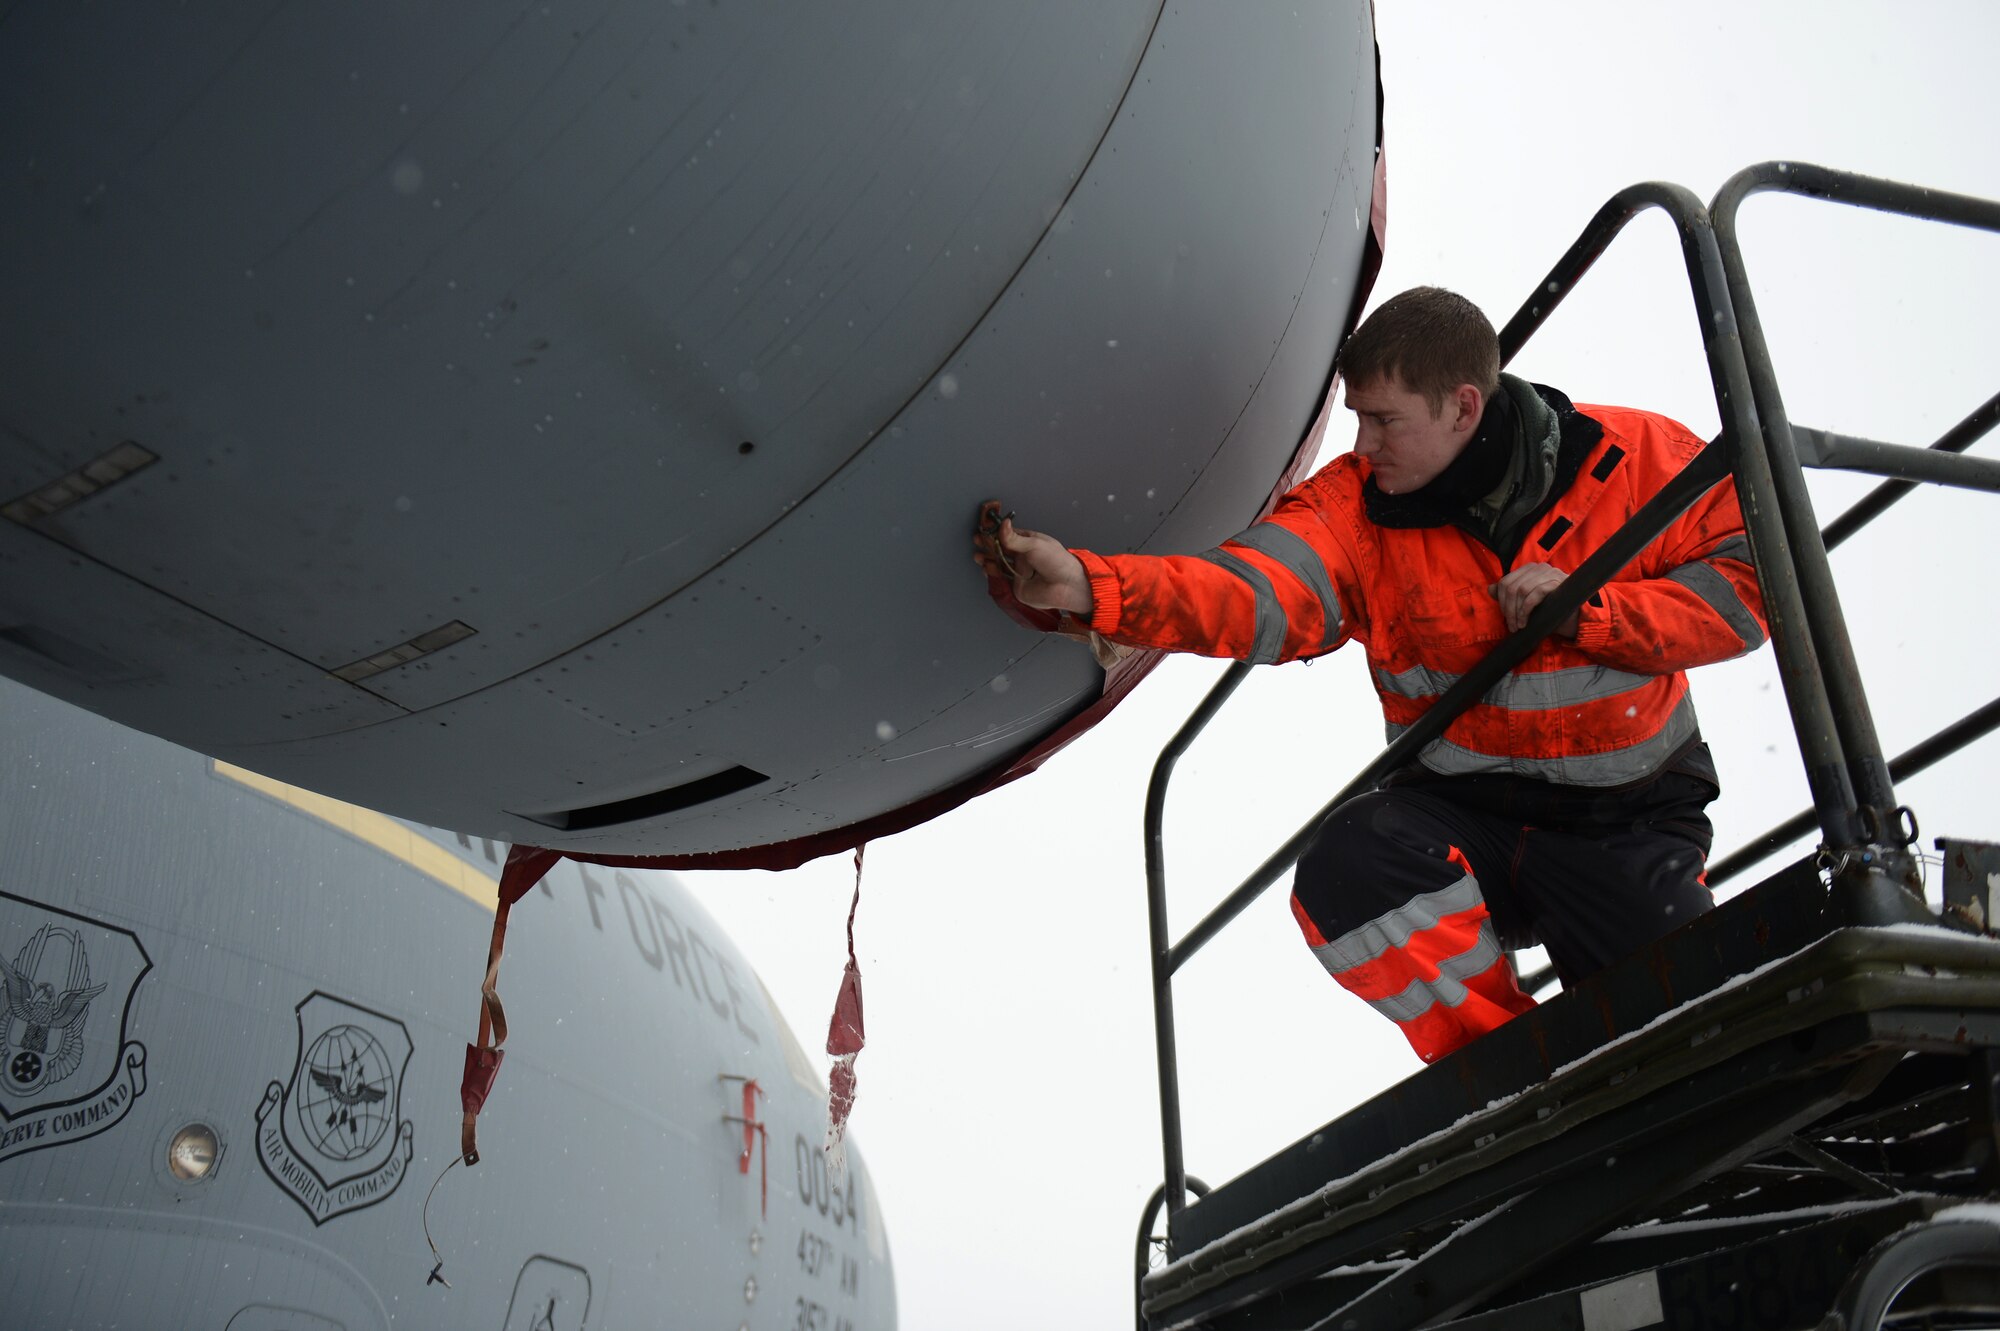 SPANGDAHLEM AIR BASE, Germany – U.S. Air Force Senior Airman Daryl Treadwell, 726th Air Mobility Squadron integrated flight control systems technician from Austin, Texas, applies an engine cover to a C-17 Globemaster III cargo aircraft Jan. 15, 2013.  The four engines are covered to prevent snow from accumulating in the engine inlets. (U.S. Air Force photo by Airman 1st Class Gustavo Castillo/Released)